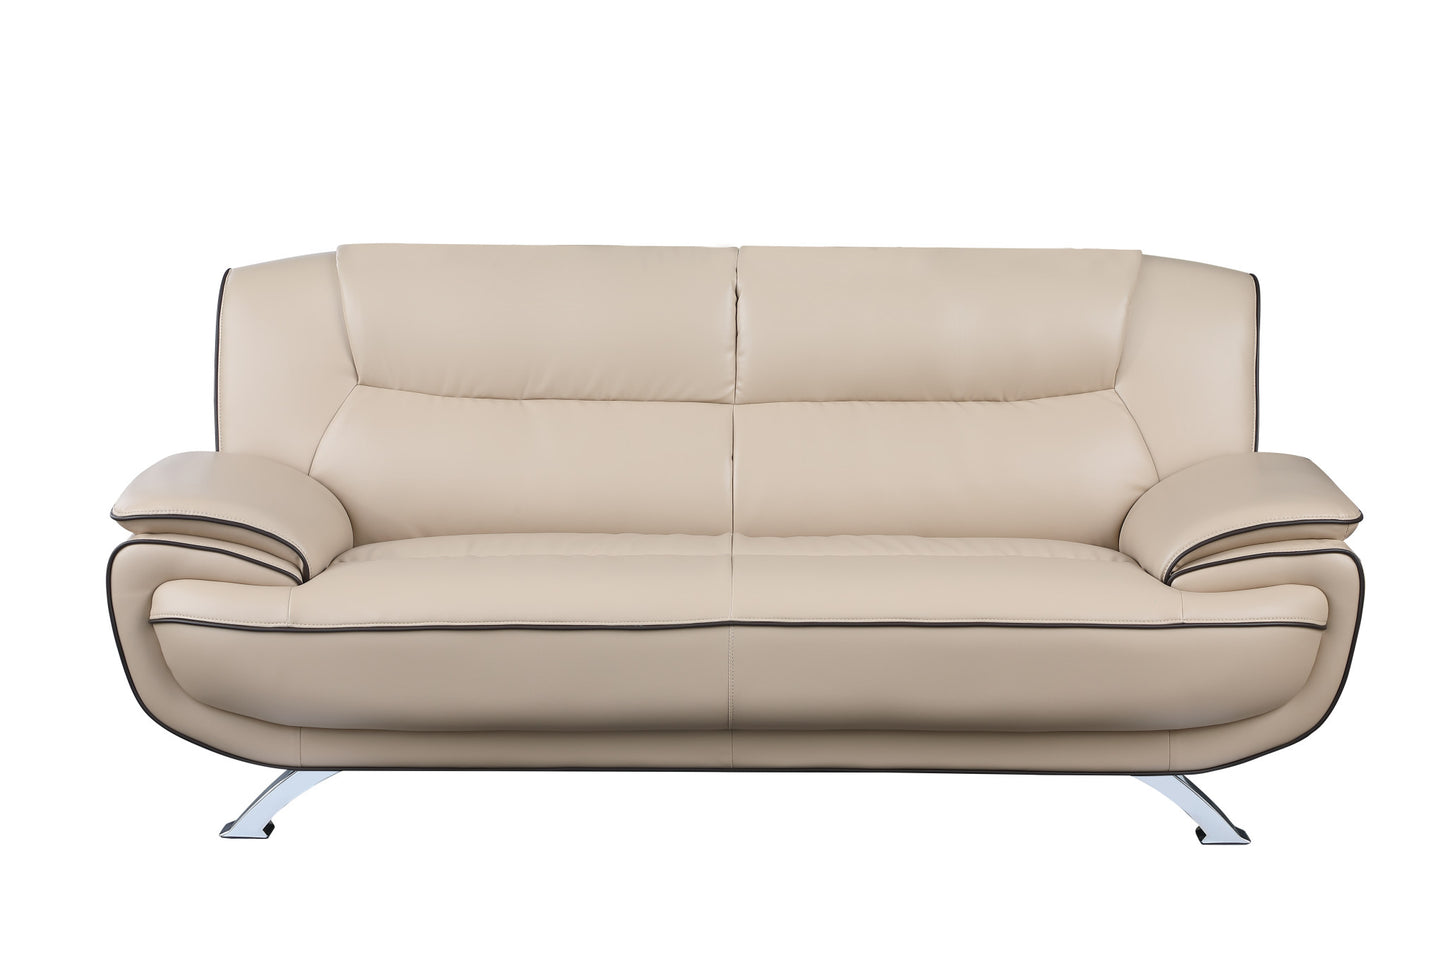 80" Beige And Silver Leather Sofa